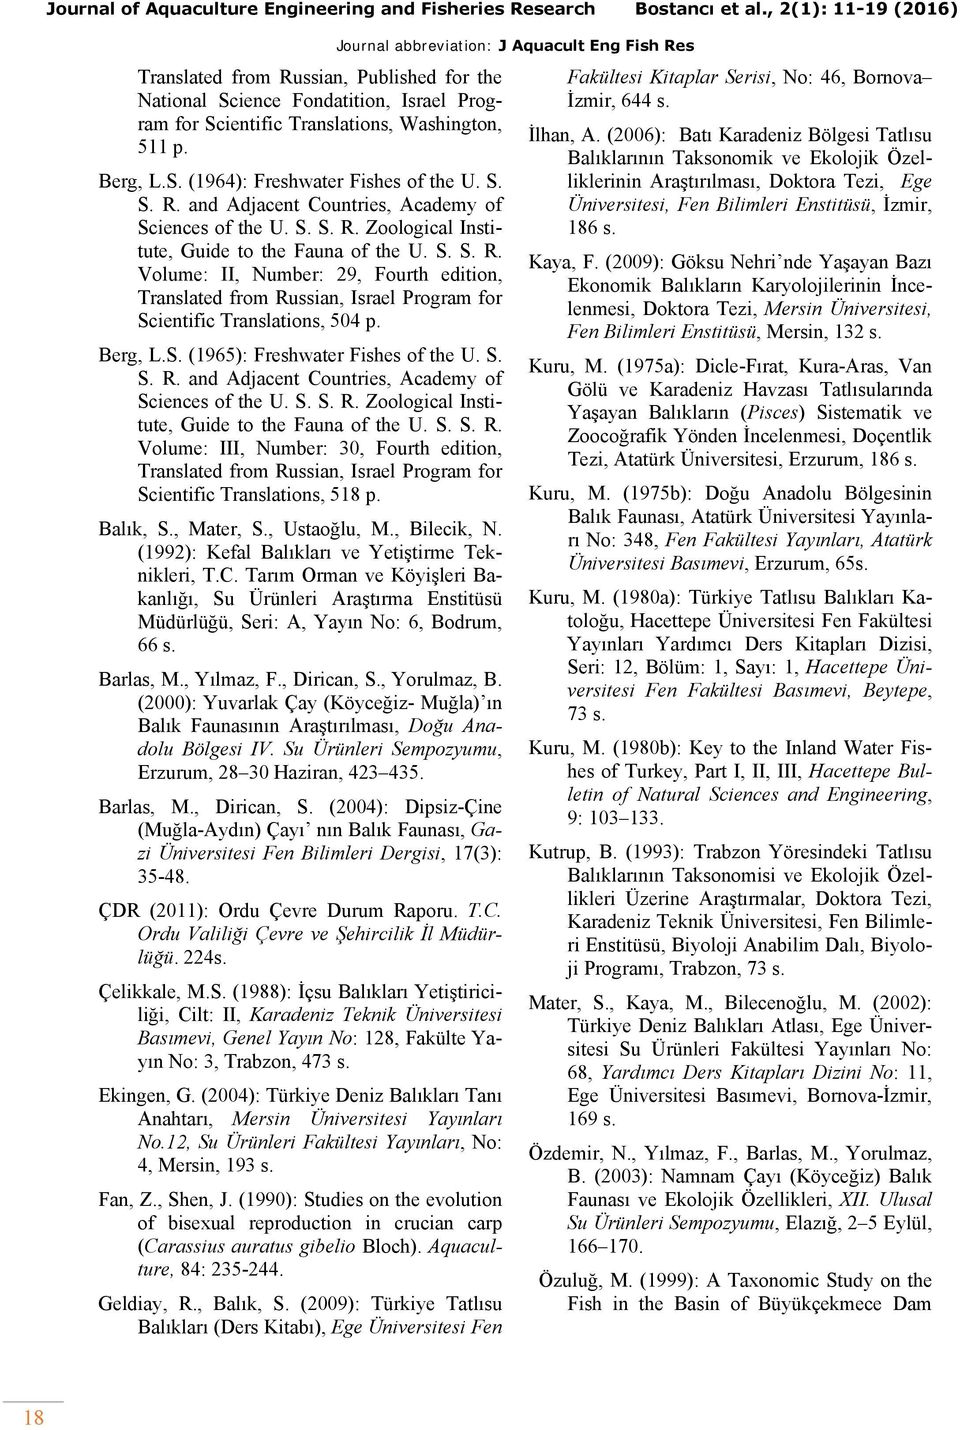 S. S. R. and Adjacent Countries, Academy of Sciences of the U. S. S. R. Zoological Institute, Guide to the Fauna of the U. S. S. R. Volume: II, Number: 29, Fourth edition, Translated from Russian, Israel Program for Scientific Translations, 504 p.